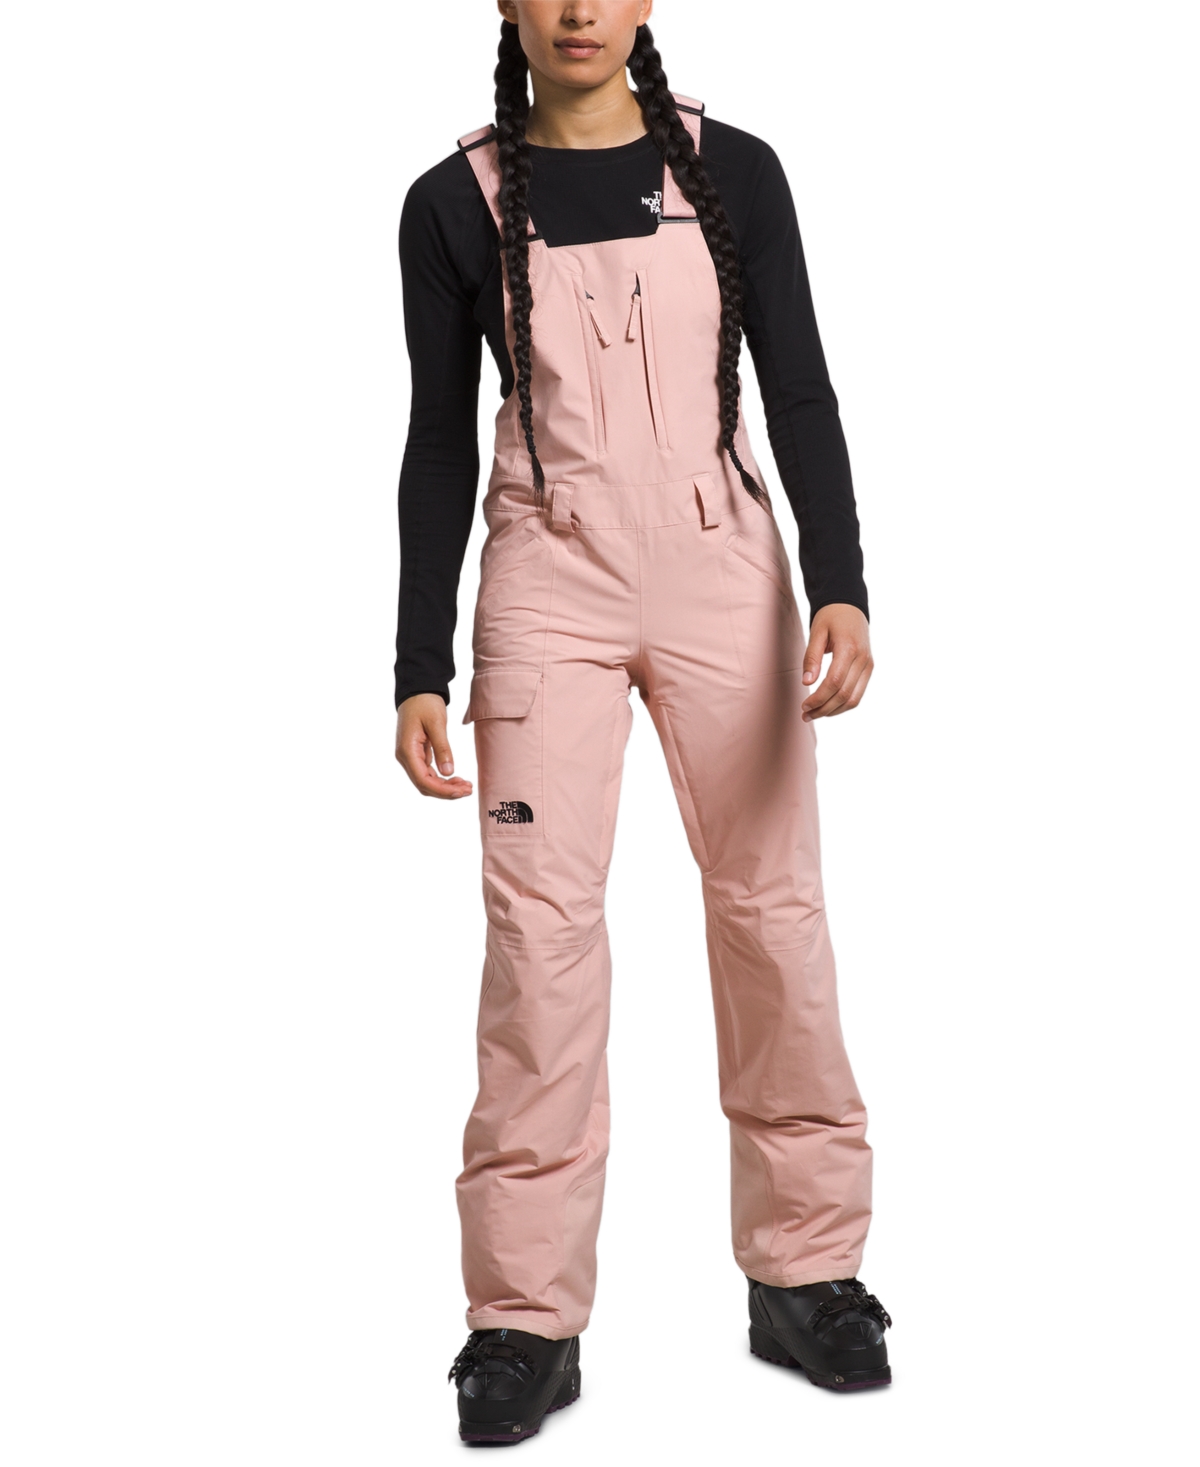 THE NORTH FACE WOMEN'S FREEDOM PRINTED BIB OVERALLS